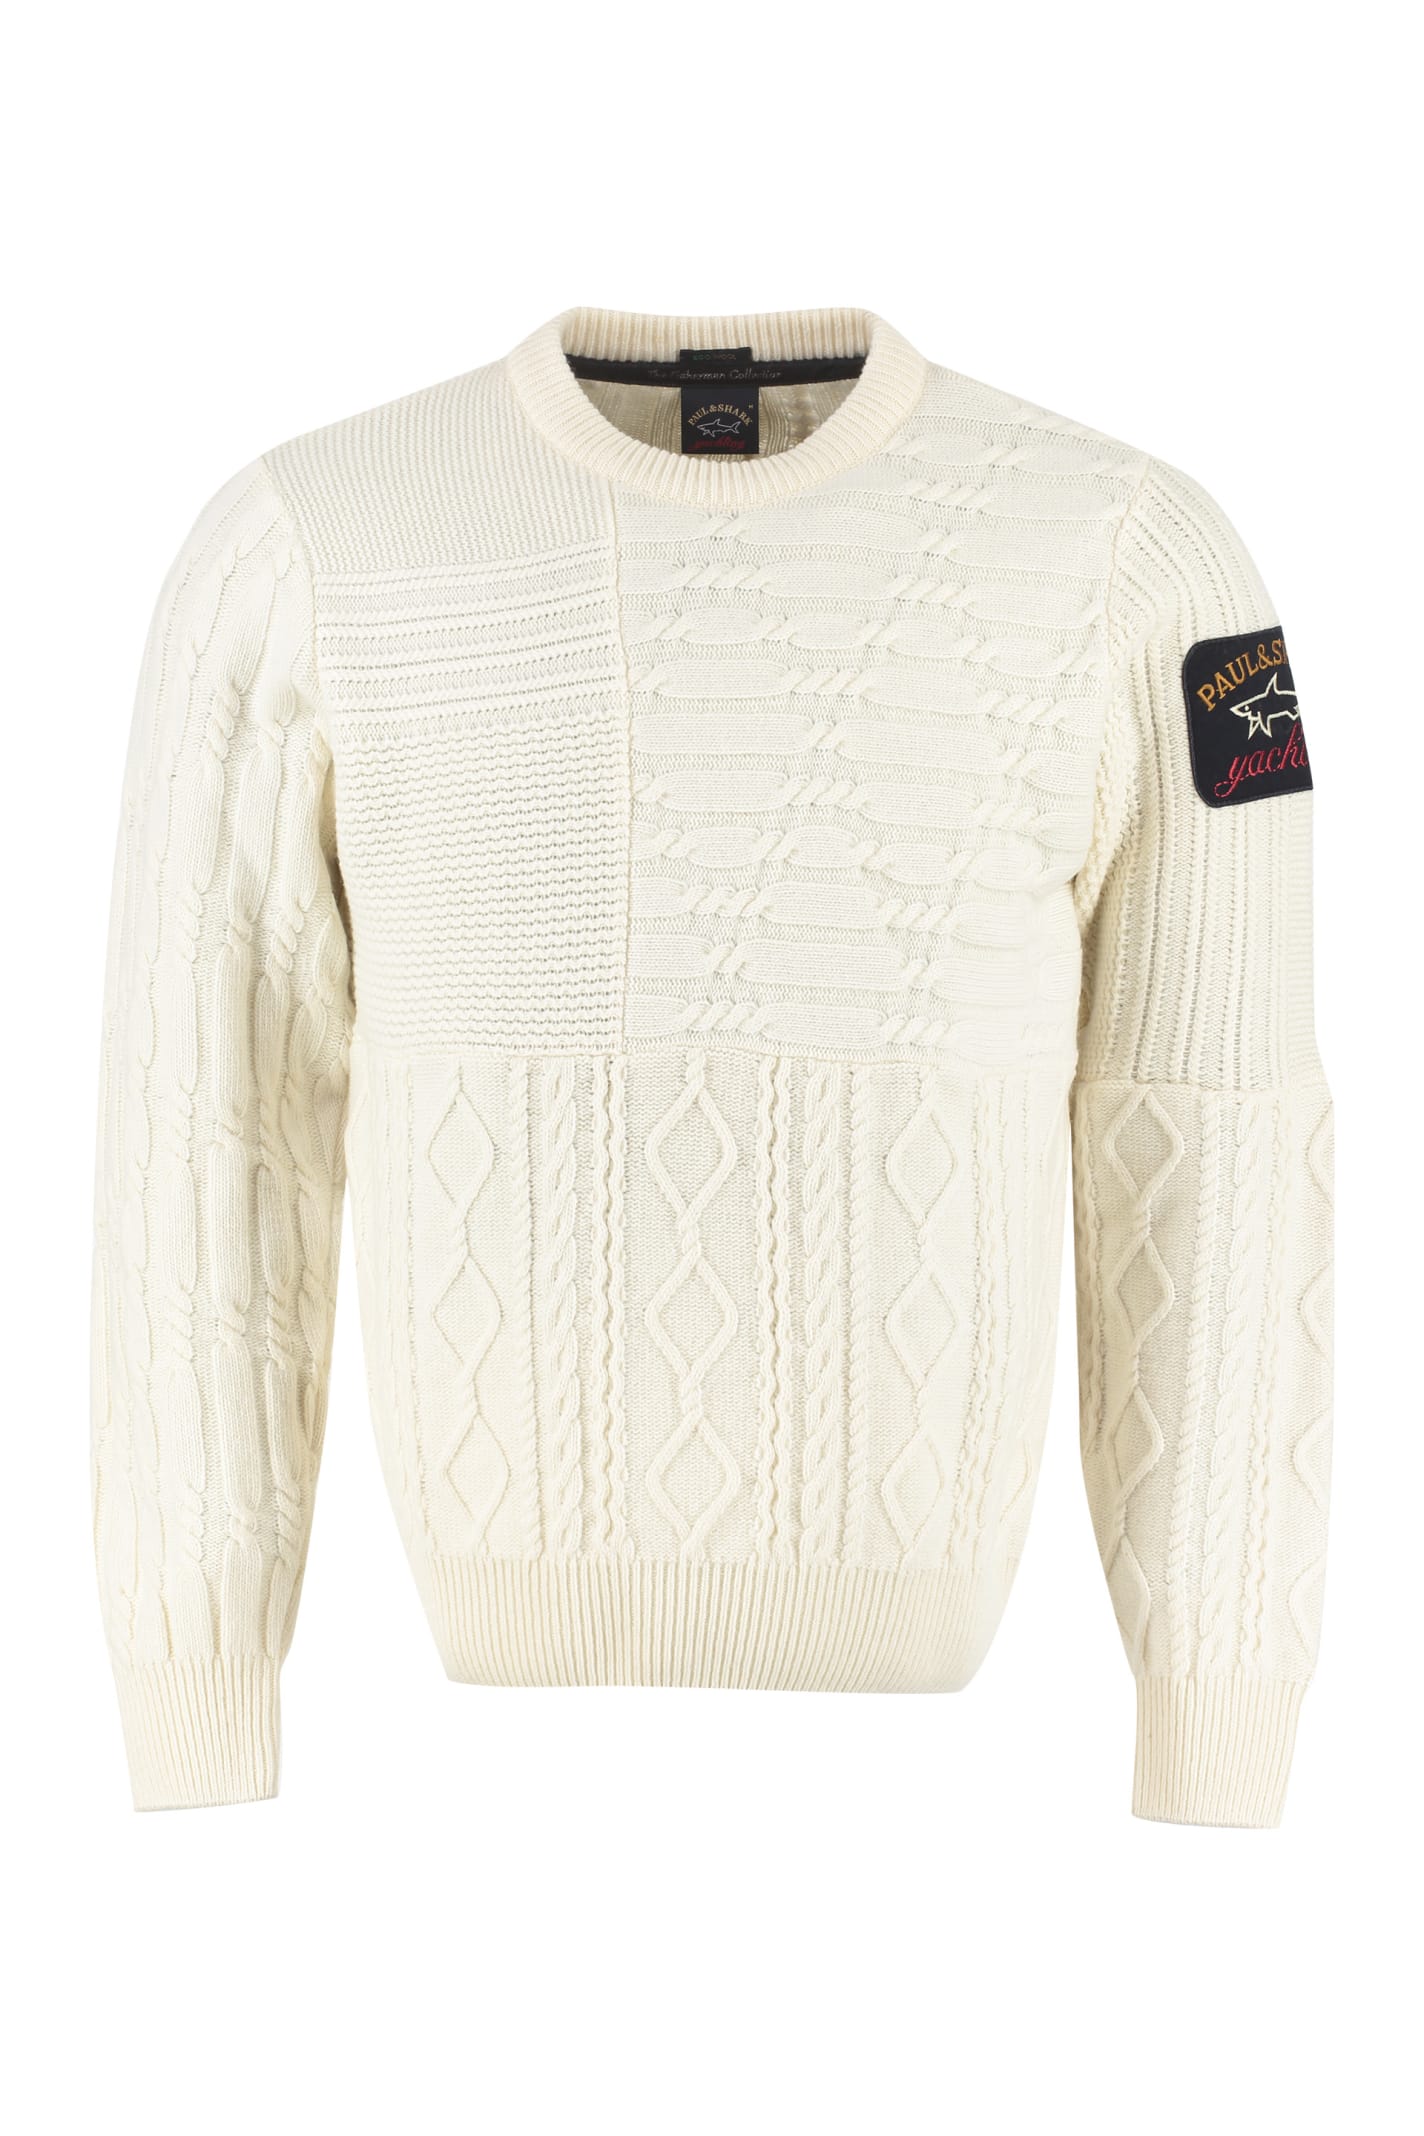 Paul & Shark Cable Knit Pullover